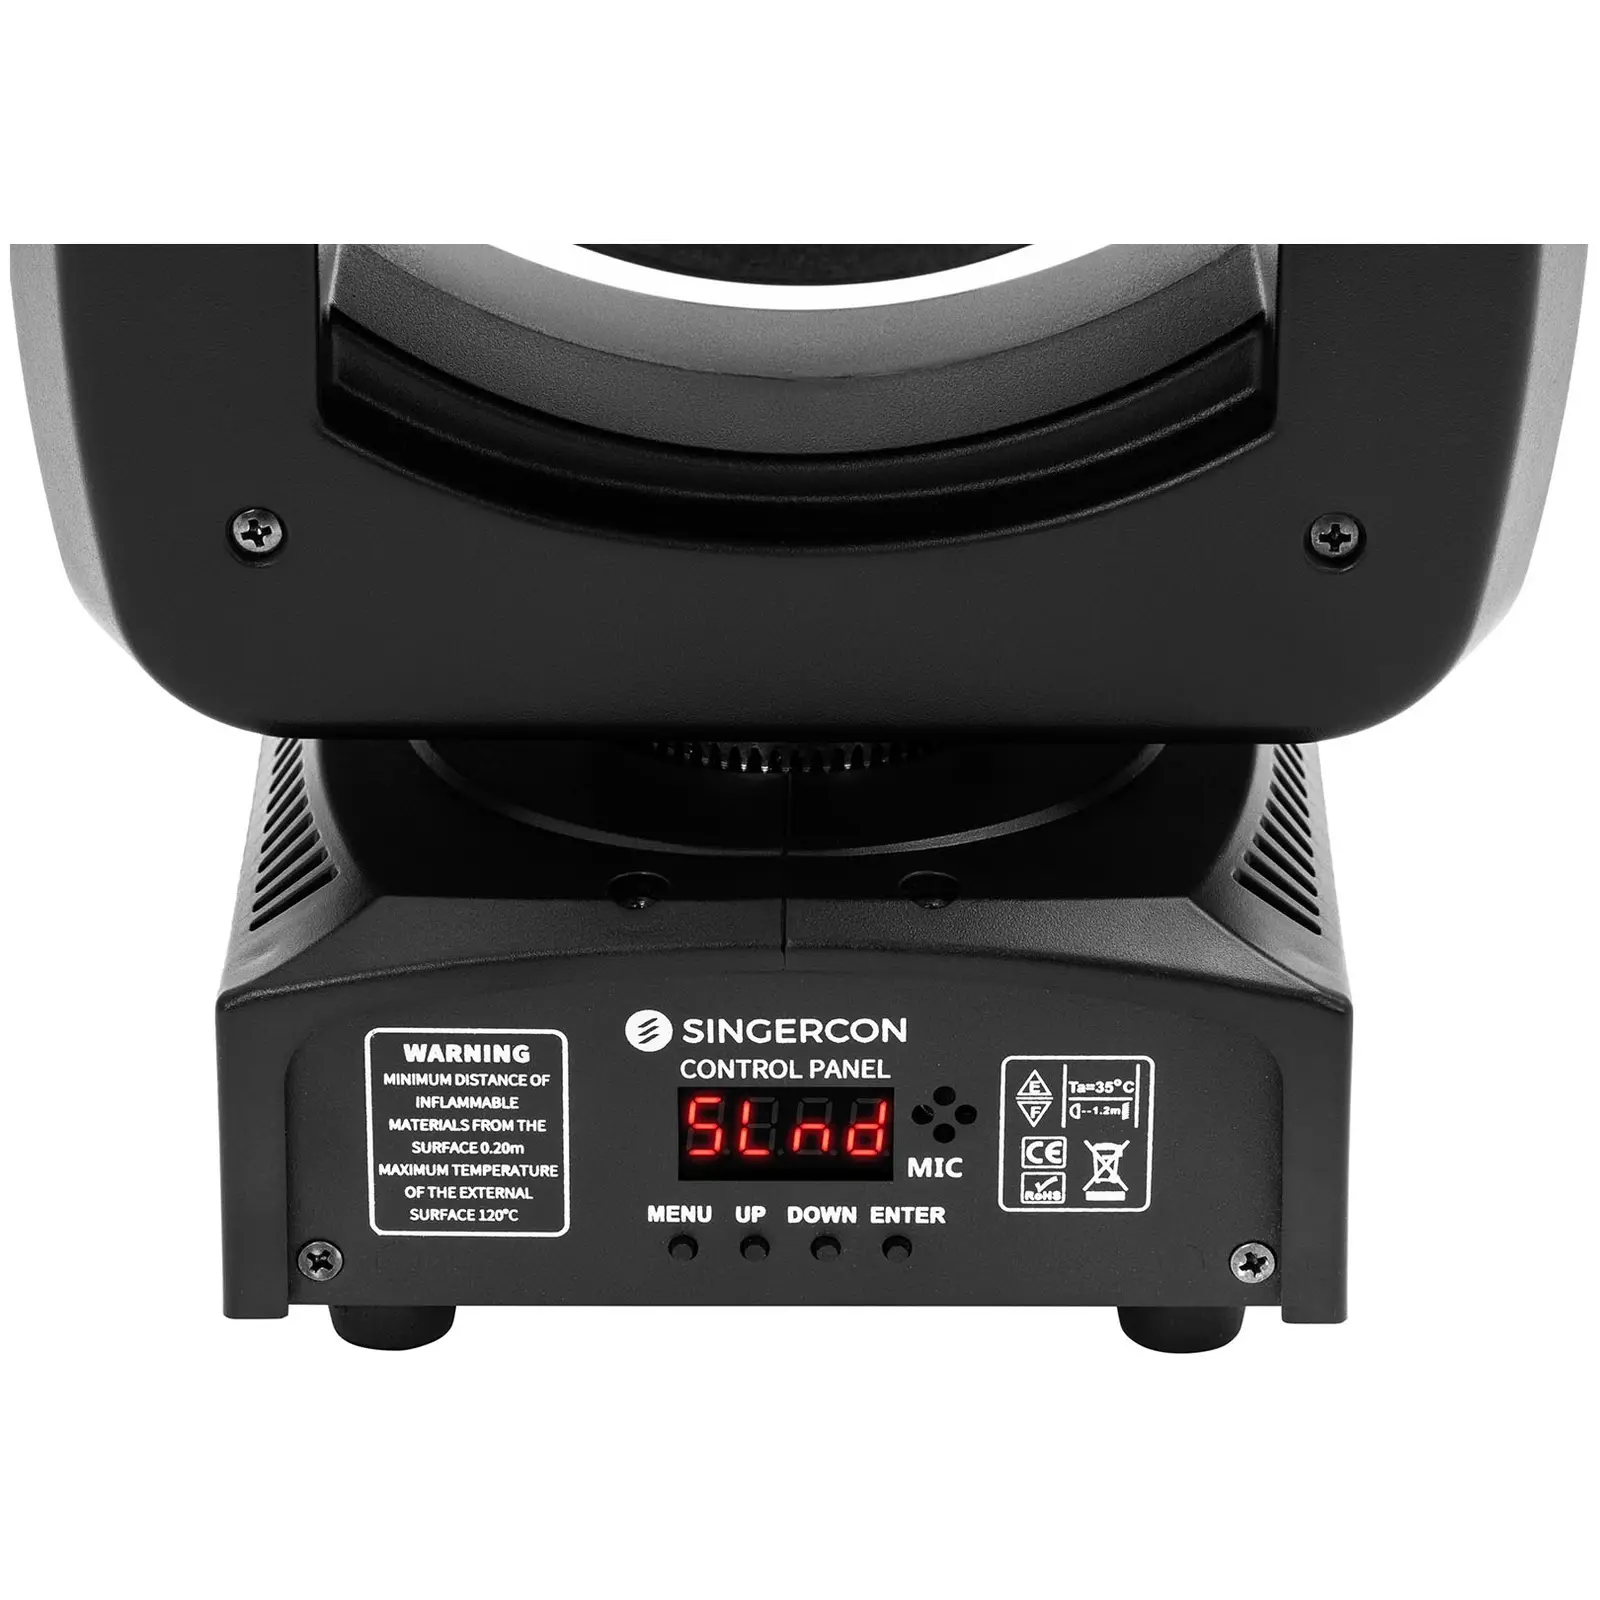 Moving Head Beam Light - 0 - 100 % dimmable - 60 W, RGBW, 4-in-1 - 120 W - RGBW